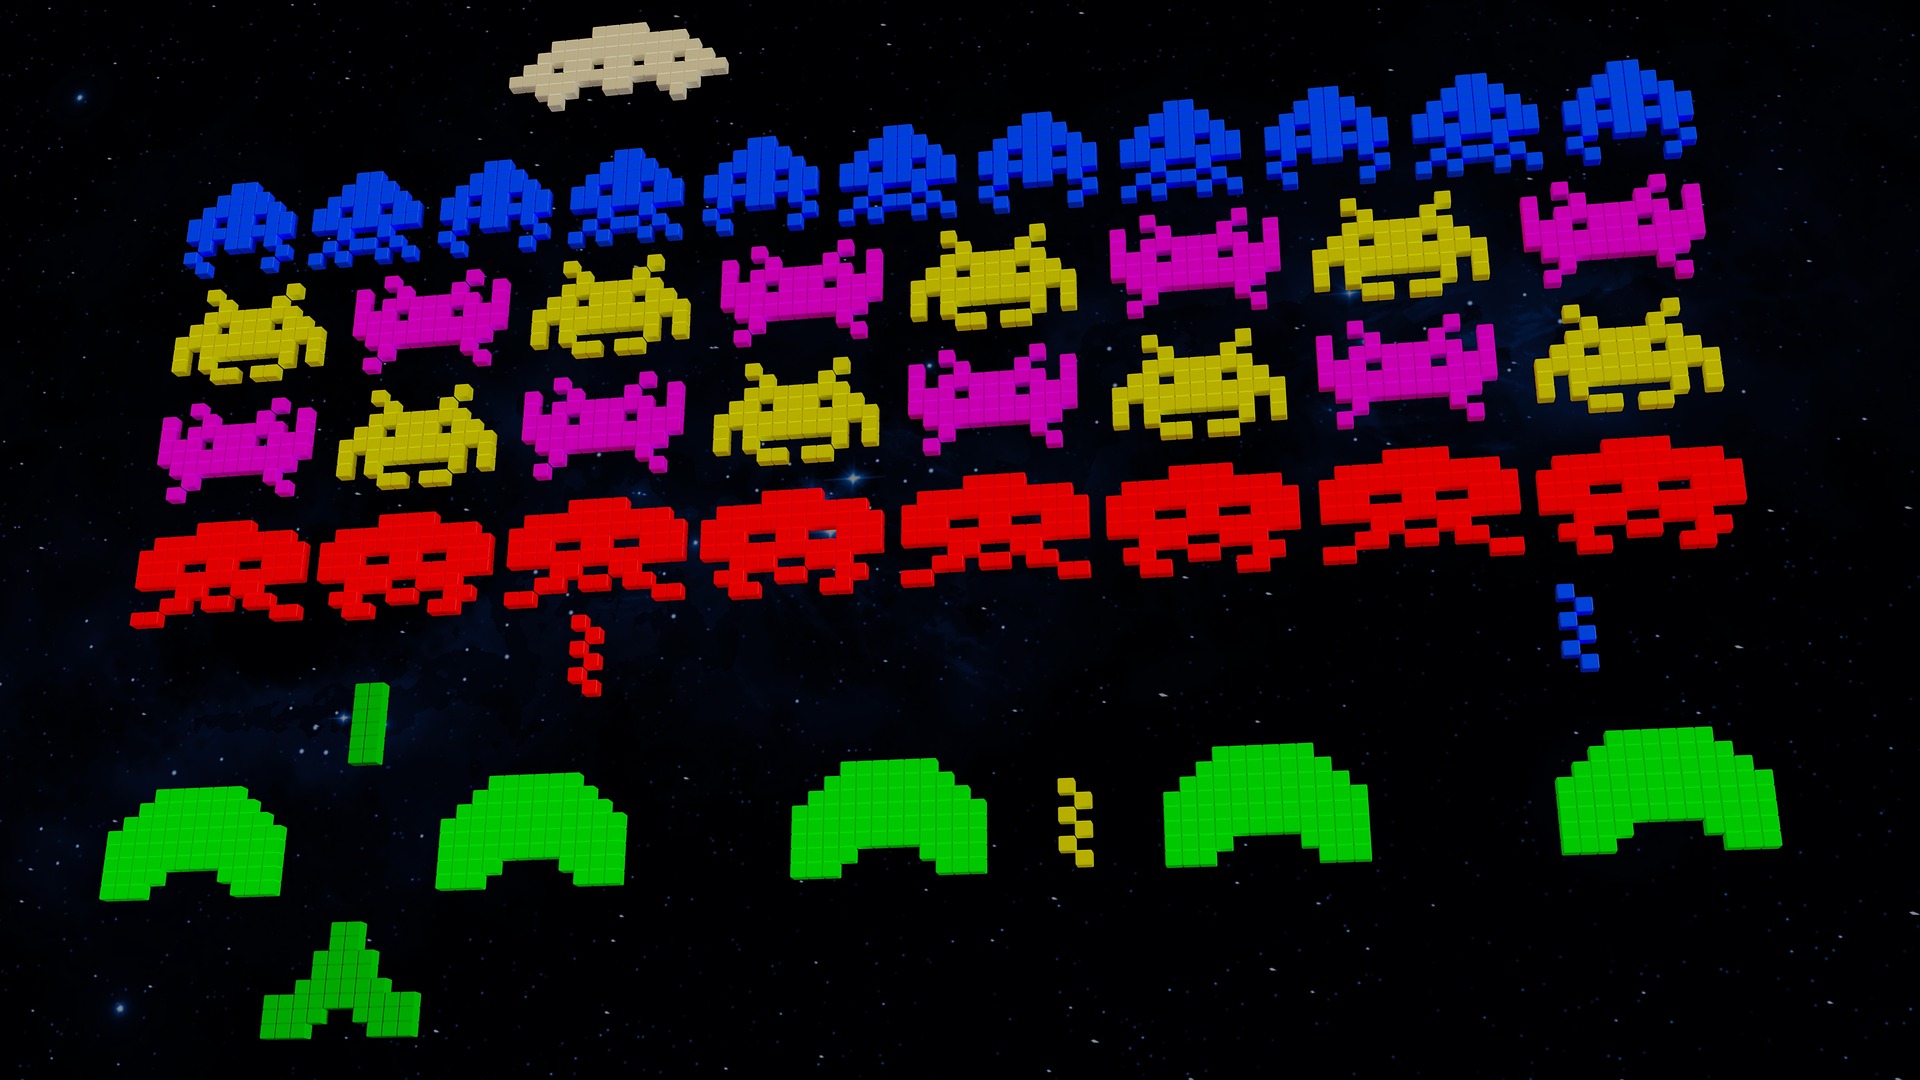 Space Invaders is a Japanese shooting video game by MasterTux